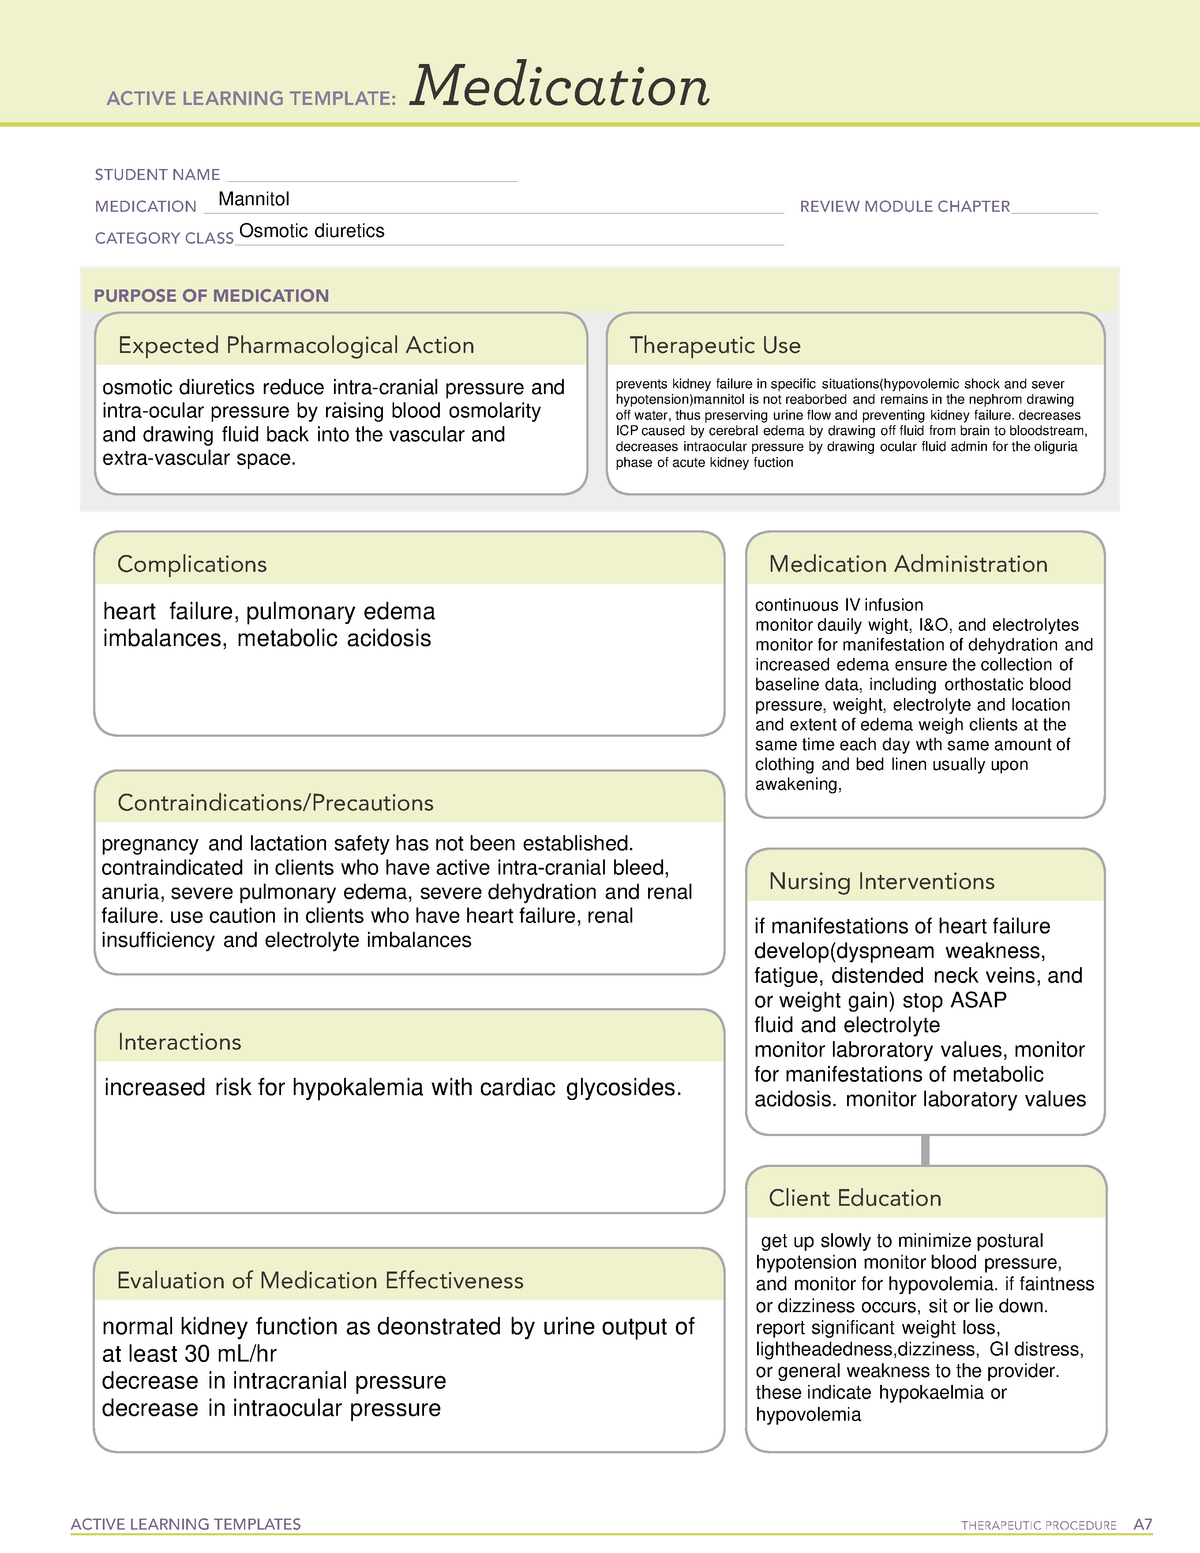 Mannitol ATI medication template 2020 ACTIVE LEARNING TEMPLATES